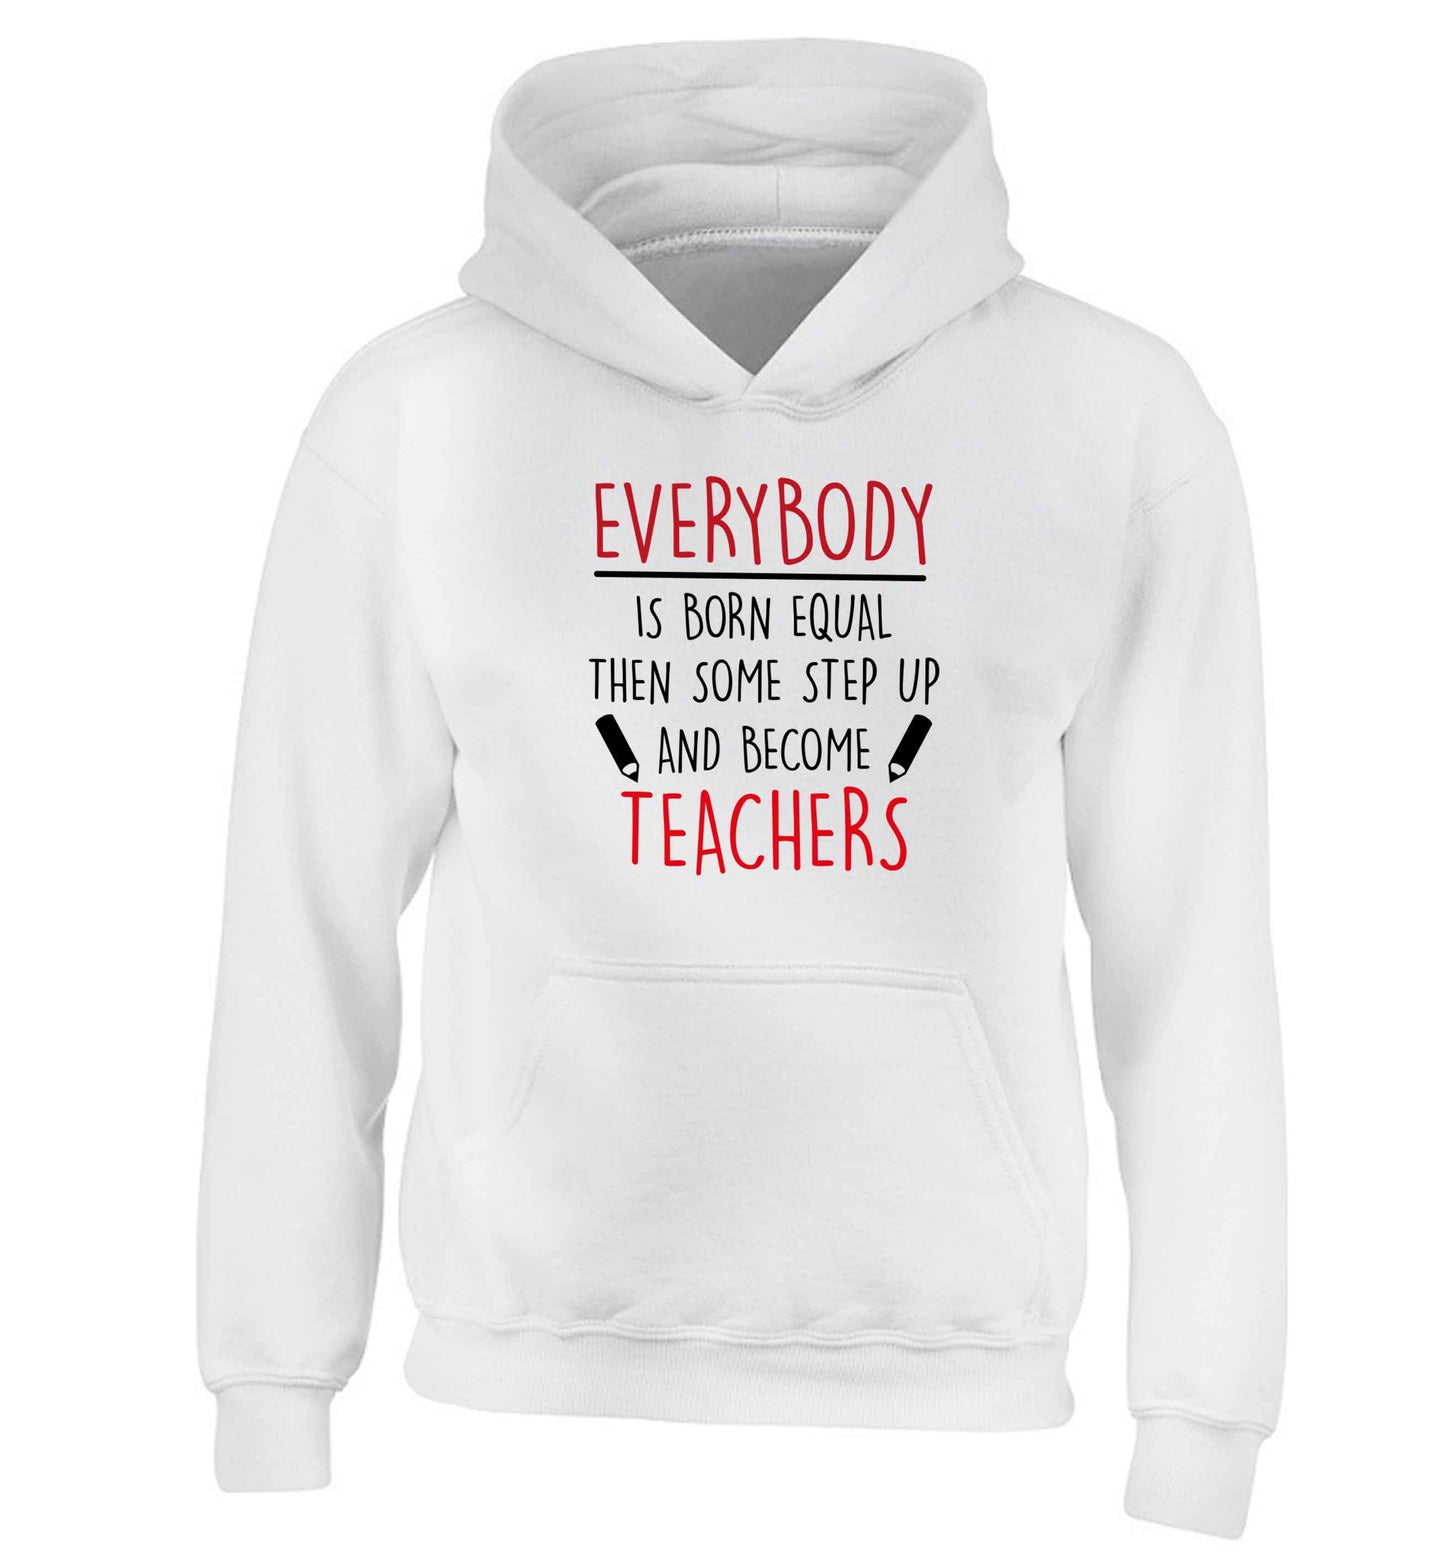 Everybody is born equal then some step up and become teachers children's white hoodie 12-13 Years